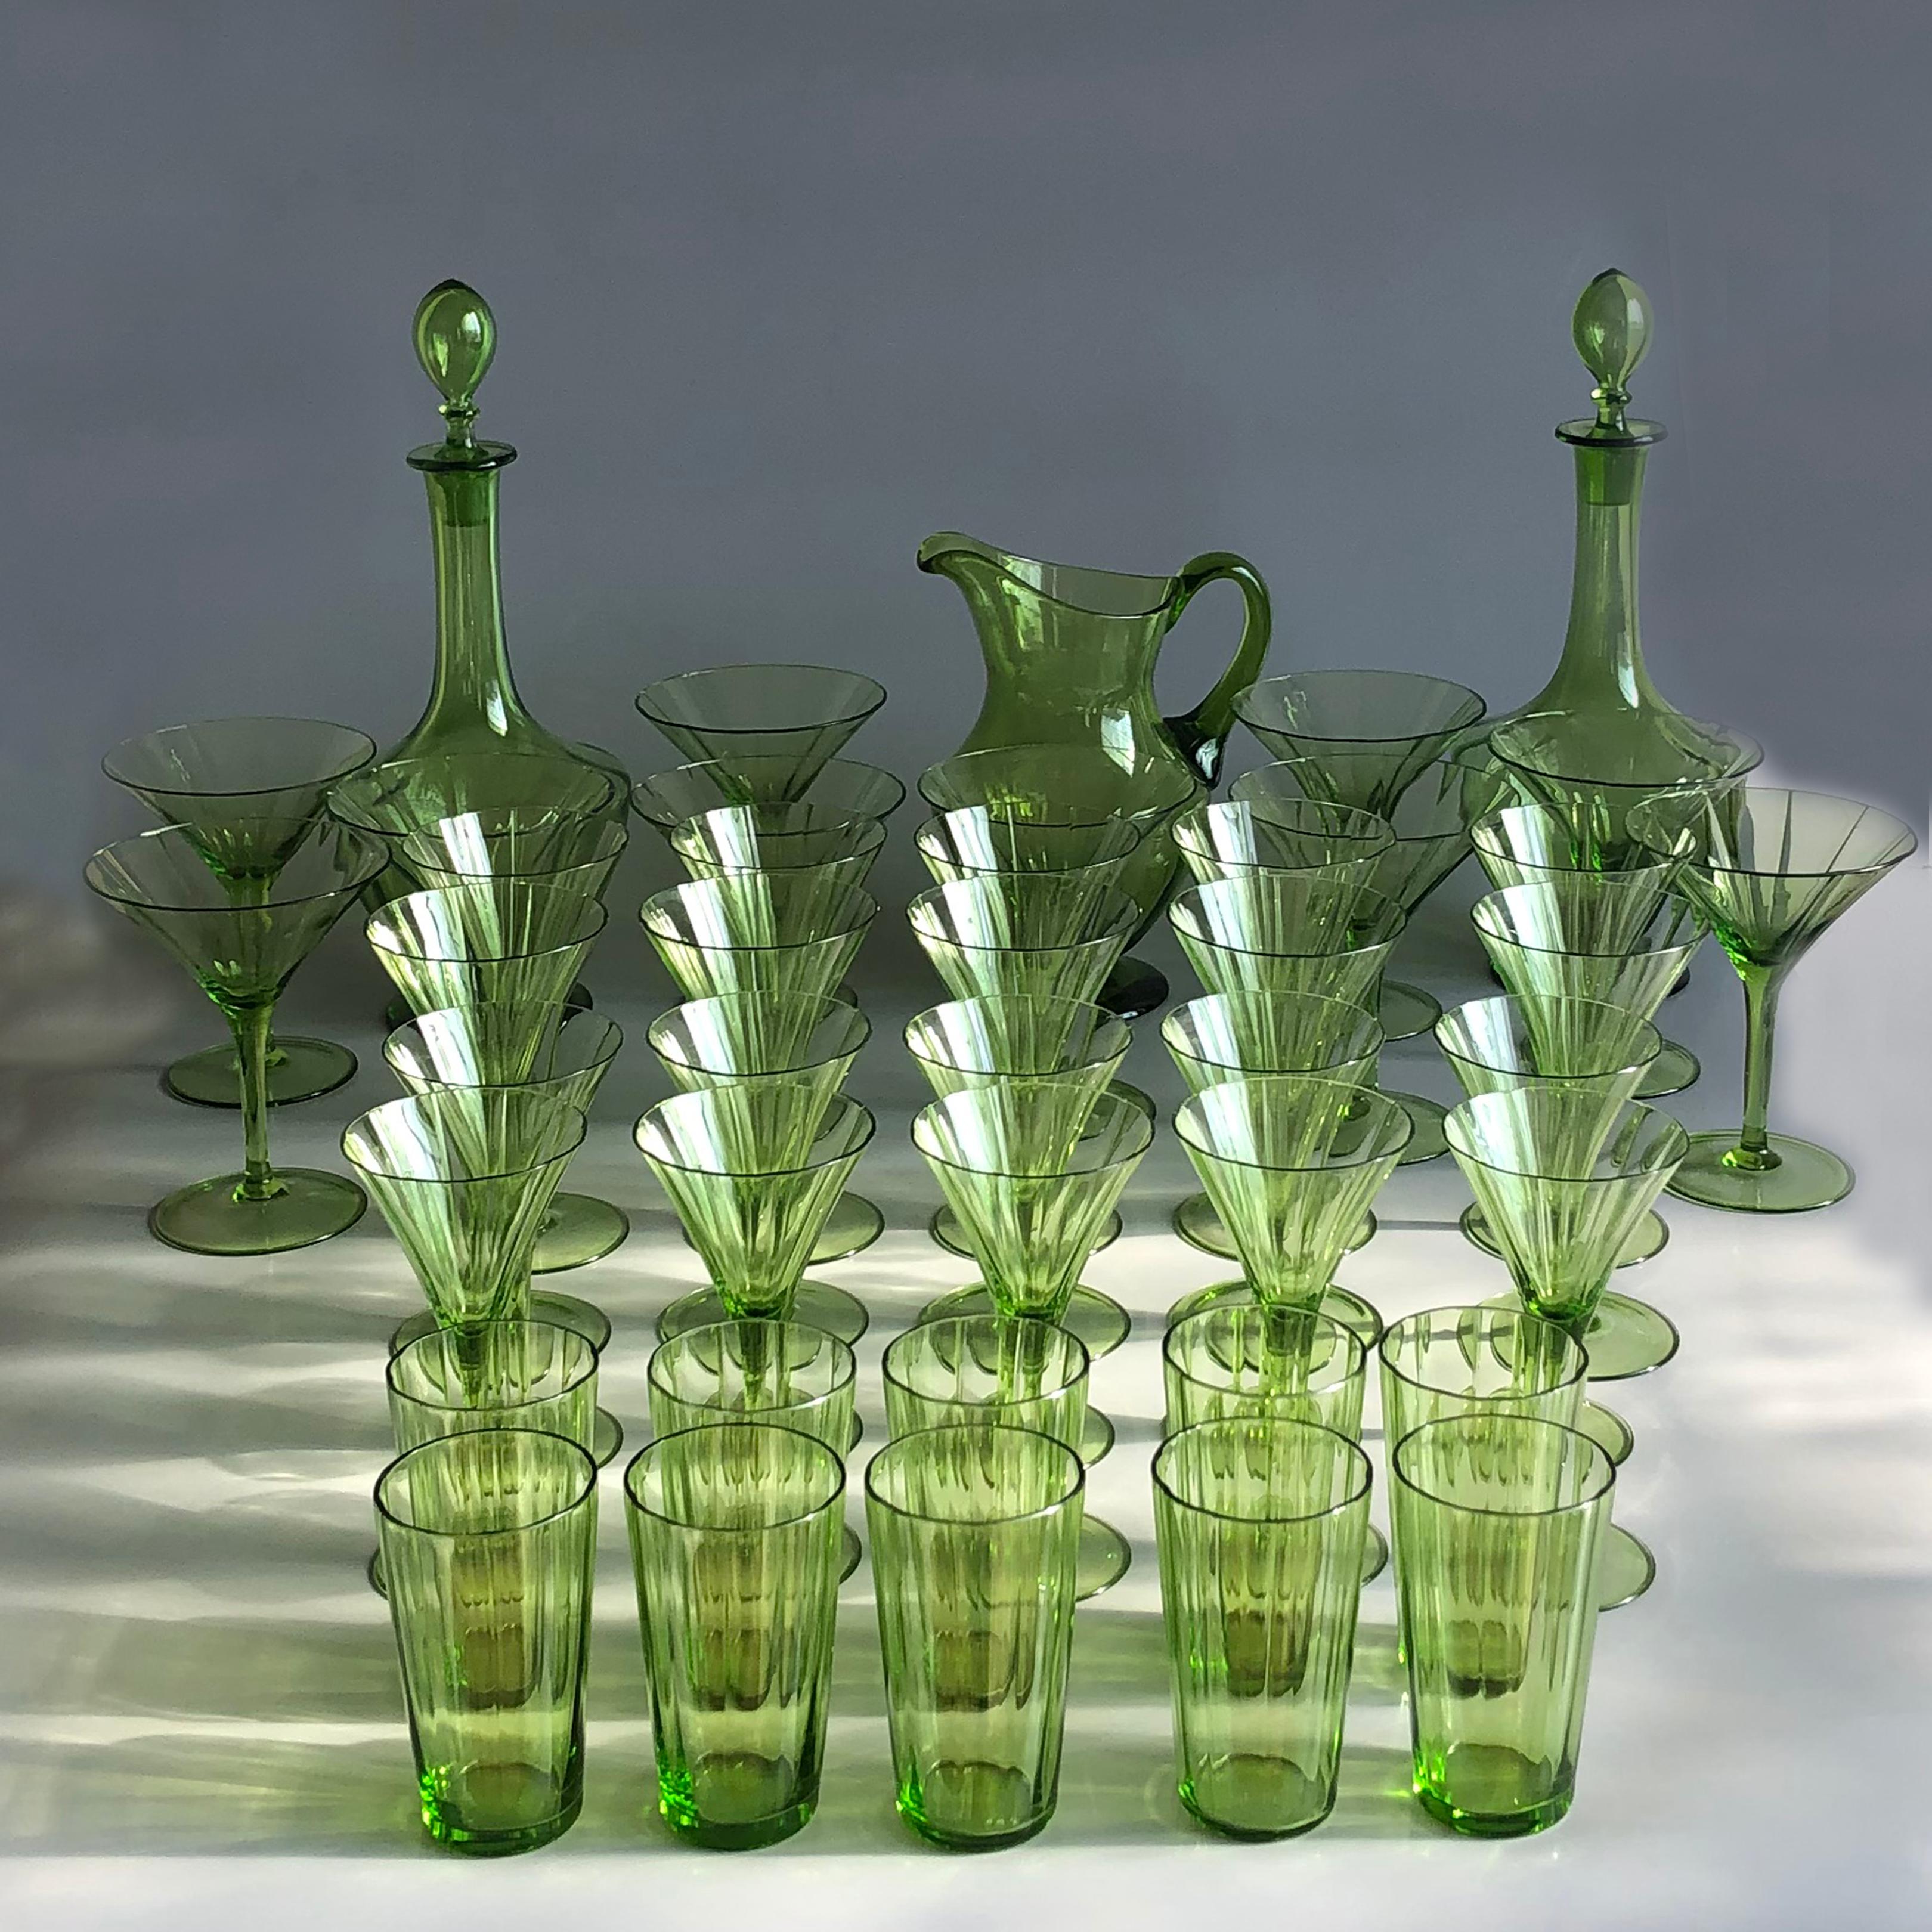 Beautifully handcrafted hand blown green glasses set consisting of 10 champagne, 10 red wine, 10 white wine and 10 water glasses together with one water jug and two carafes with stoppers. No cracks or chips on glasses. The glasses are in outstanding